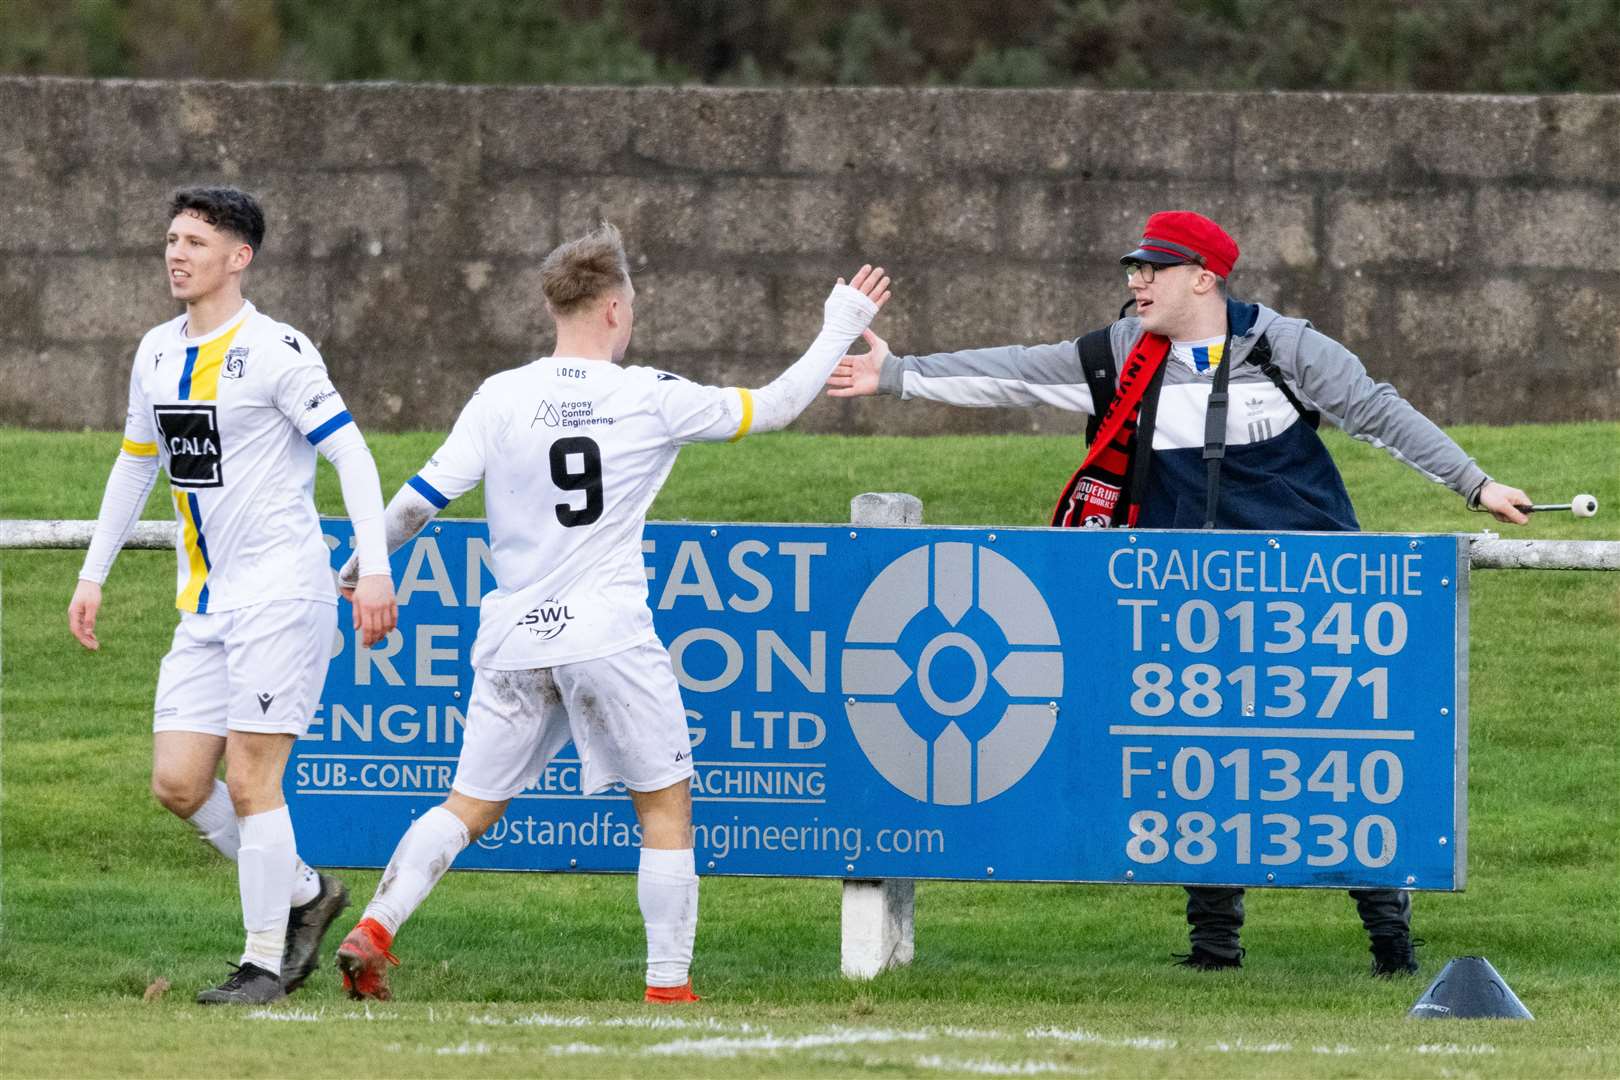 Inverurie's Nathan Meres celebrates with a fan. ..Rothes F.C. (1) v Inverurie Locos F.C. (4) at Mackessack Park, Rothes. ..Piture: Beth Taylor.